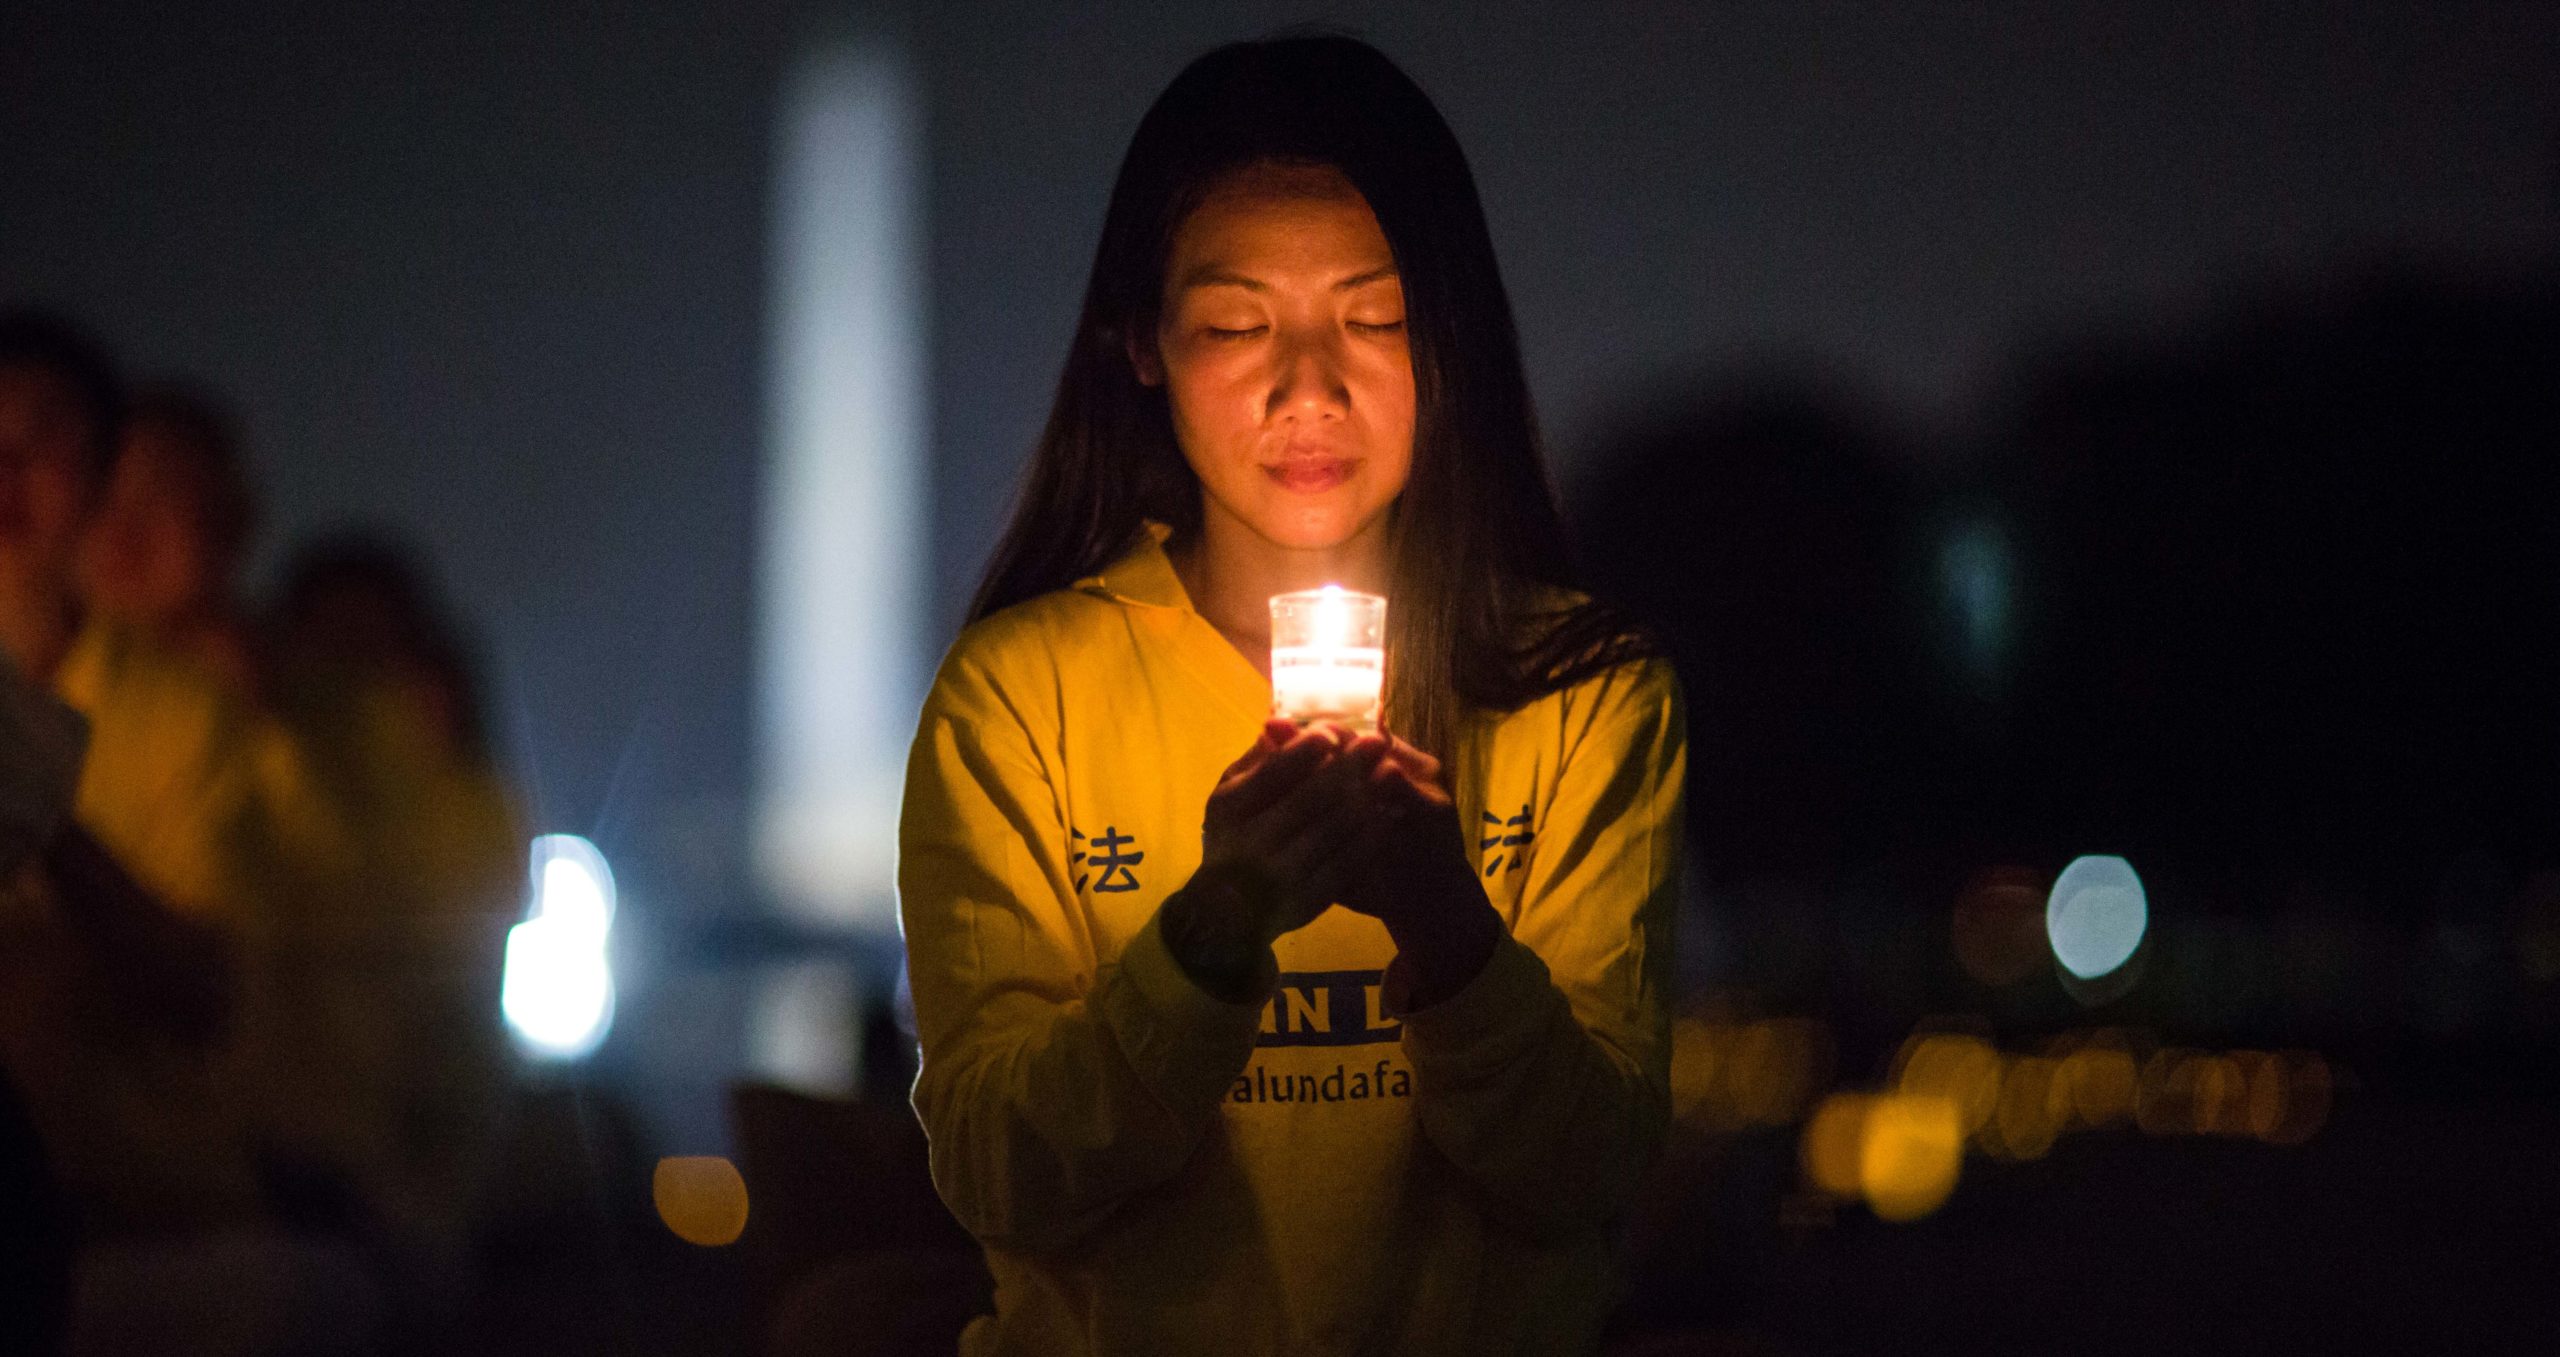 A woman joins Falun Gong practitioners holding a candlelight vigil at the Lincoln Memorial in Washington D.C.